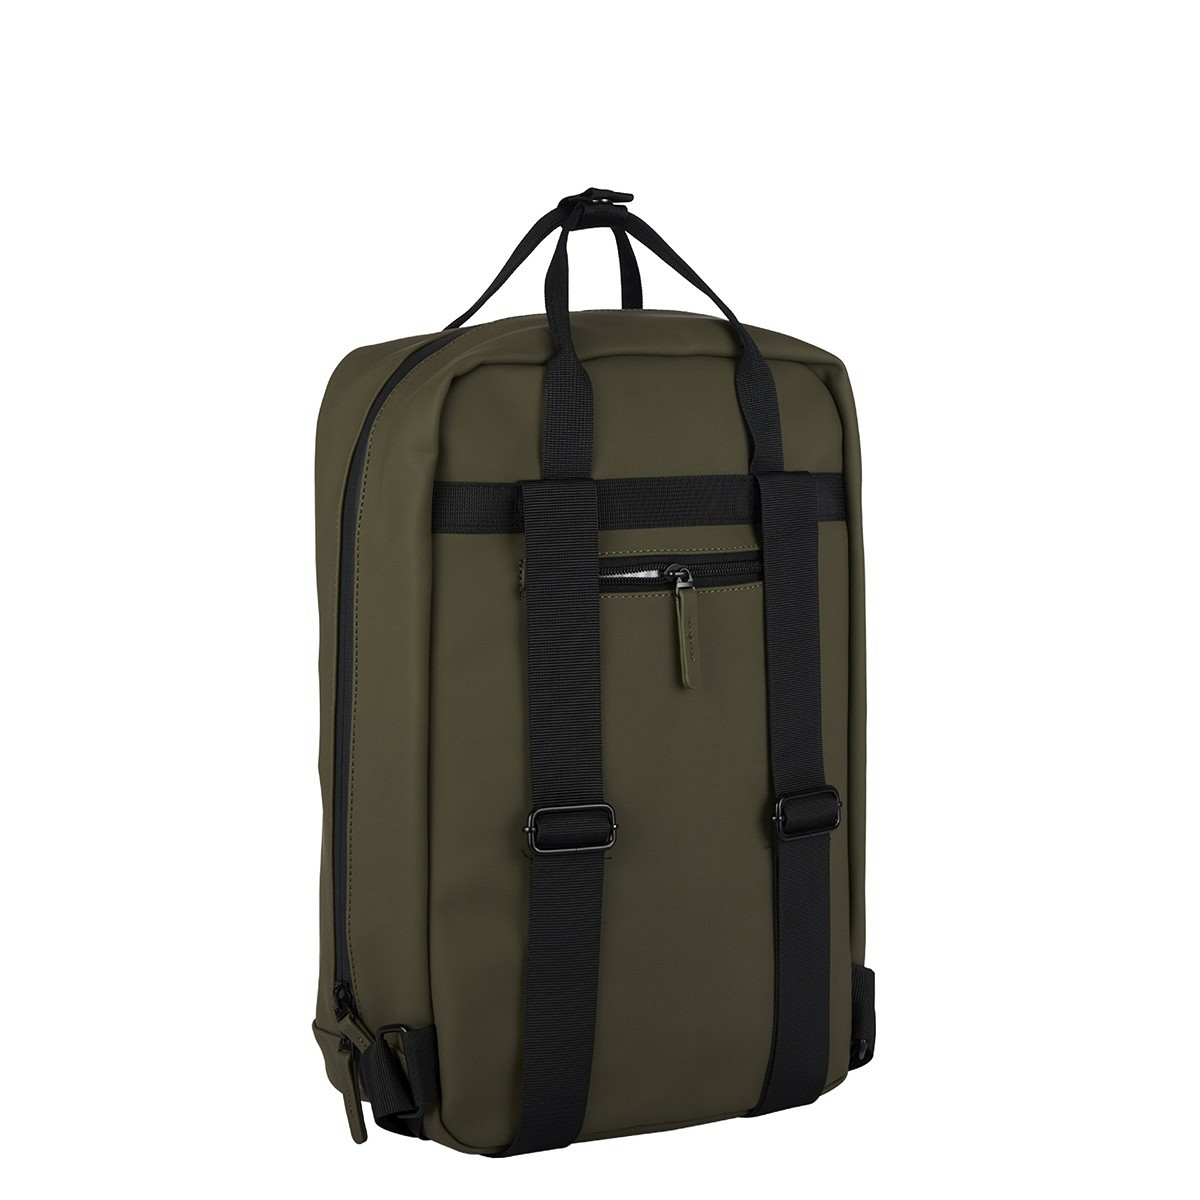 Bowie - Cape Coral Rolltop Rucksack olive